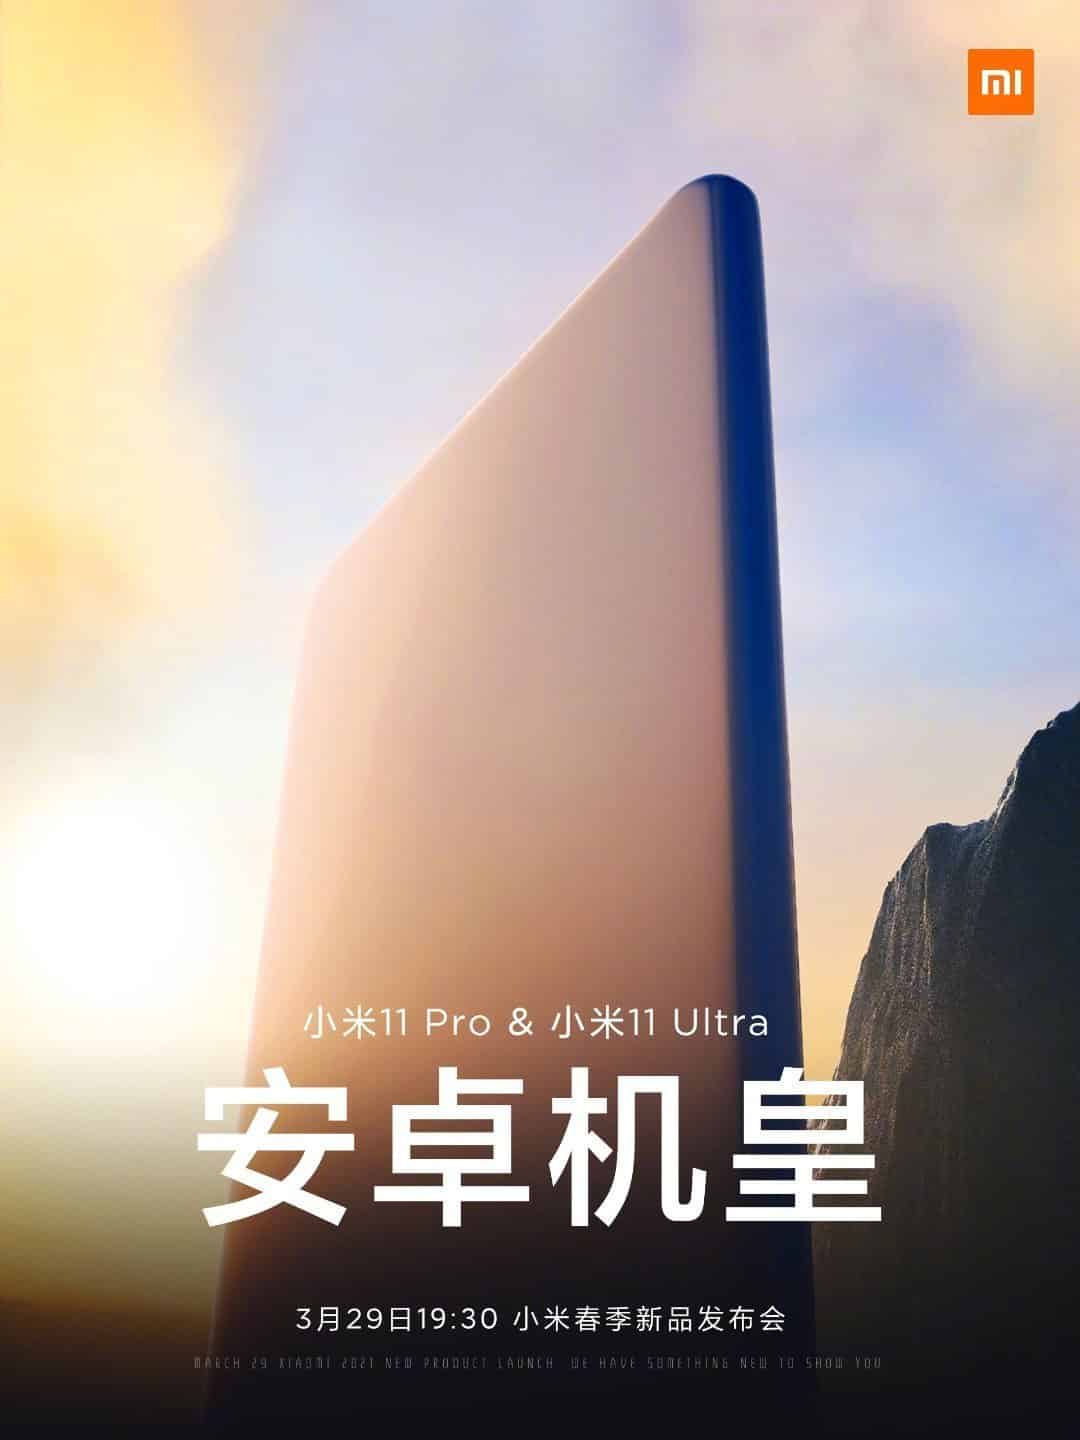 Xiaomi Mi 11 Pro and Mi 11 Ultra launch confirmed on March 29